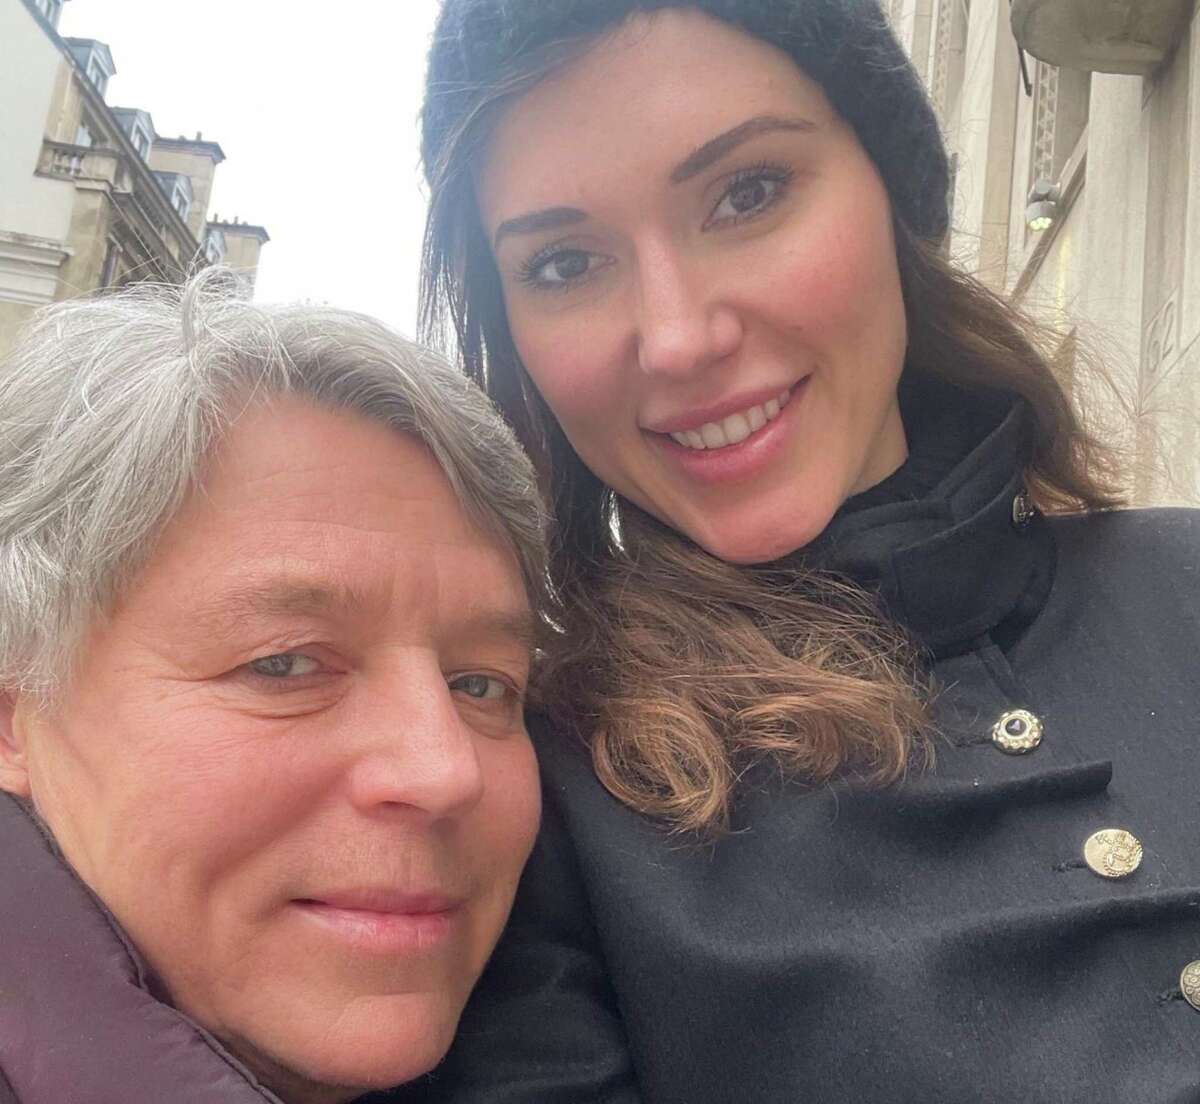 Greenwich resident Olga Litvinenko and her great-aunt, Svetlana Fedoran, take a photo together on the streets of Paris. Litvinenko helped her family member and other refugees from Ukraine journey to France.